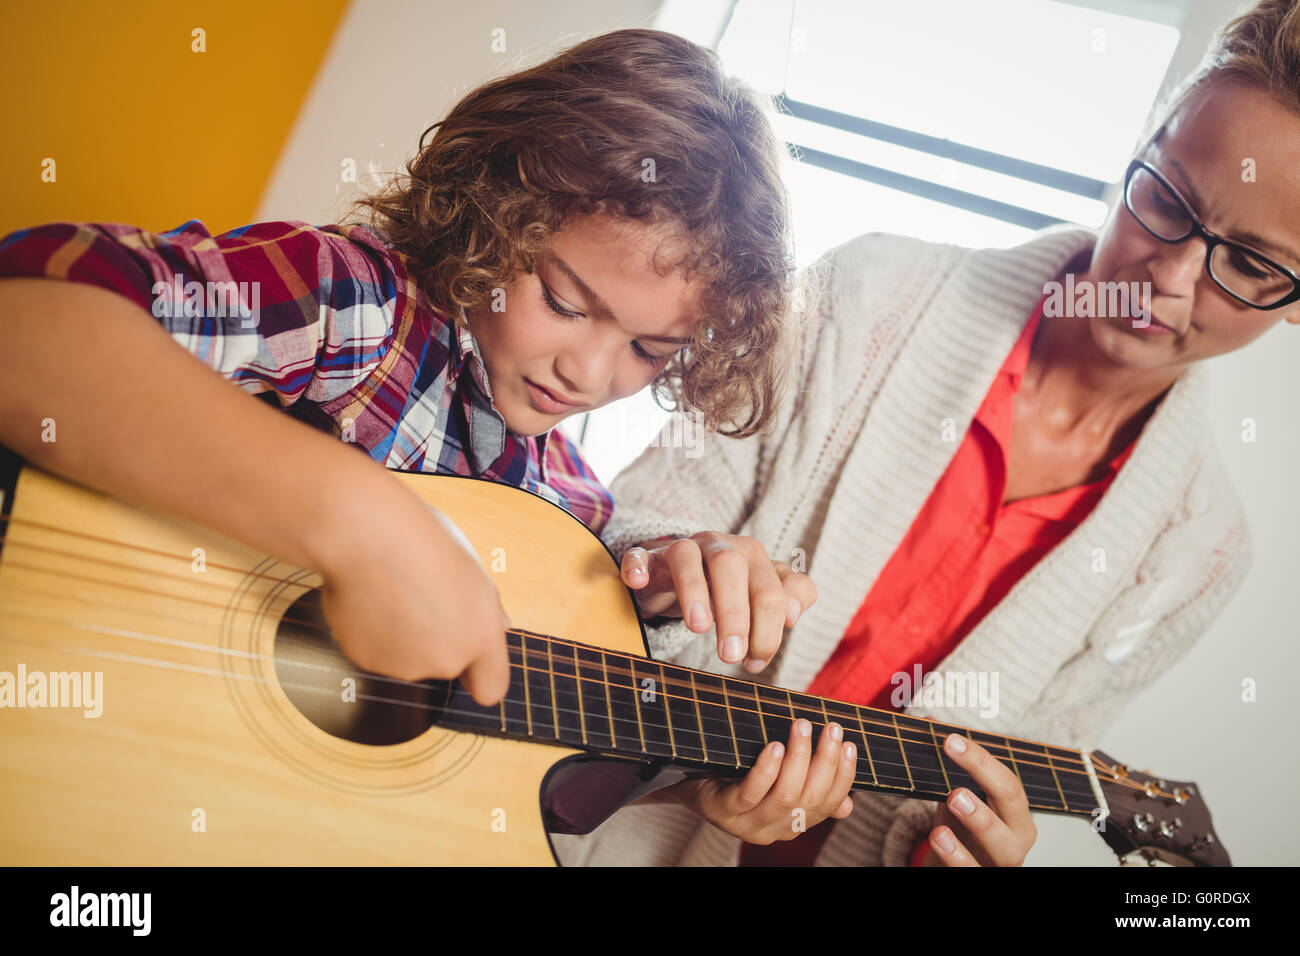 Boy learning how to play the guitar Stock Photo